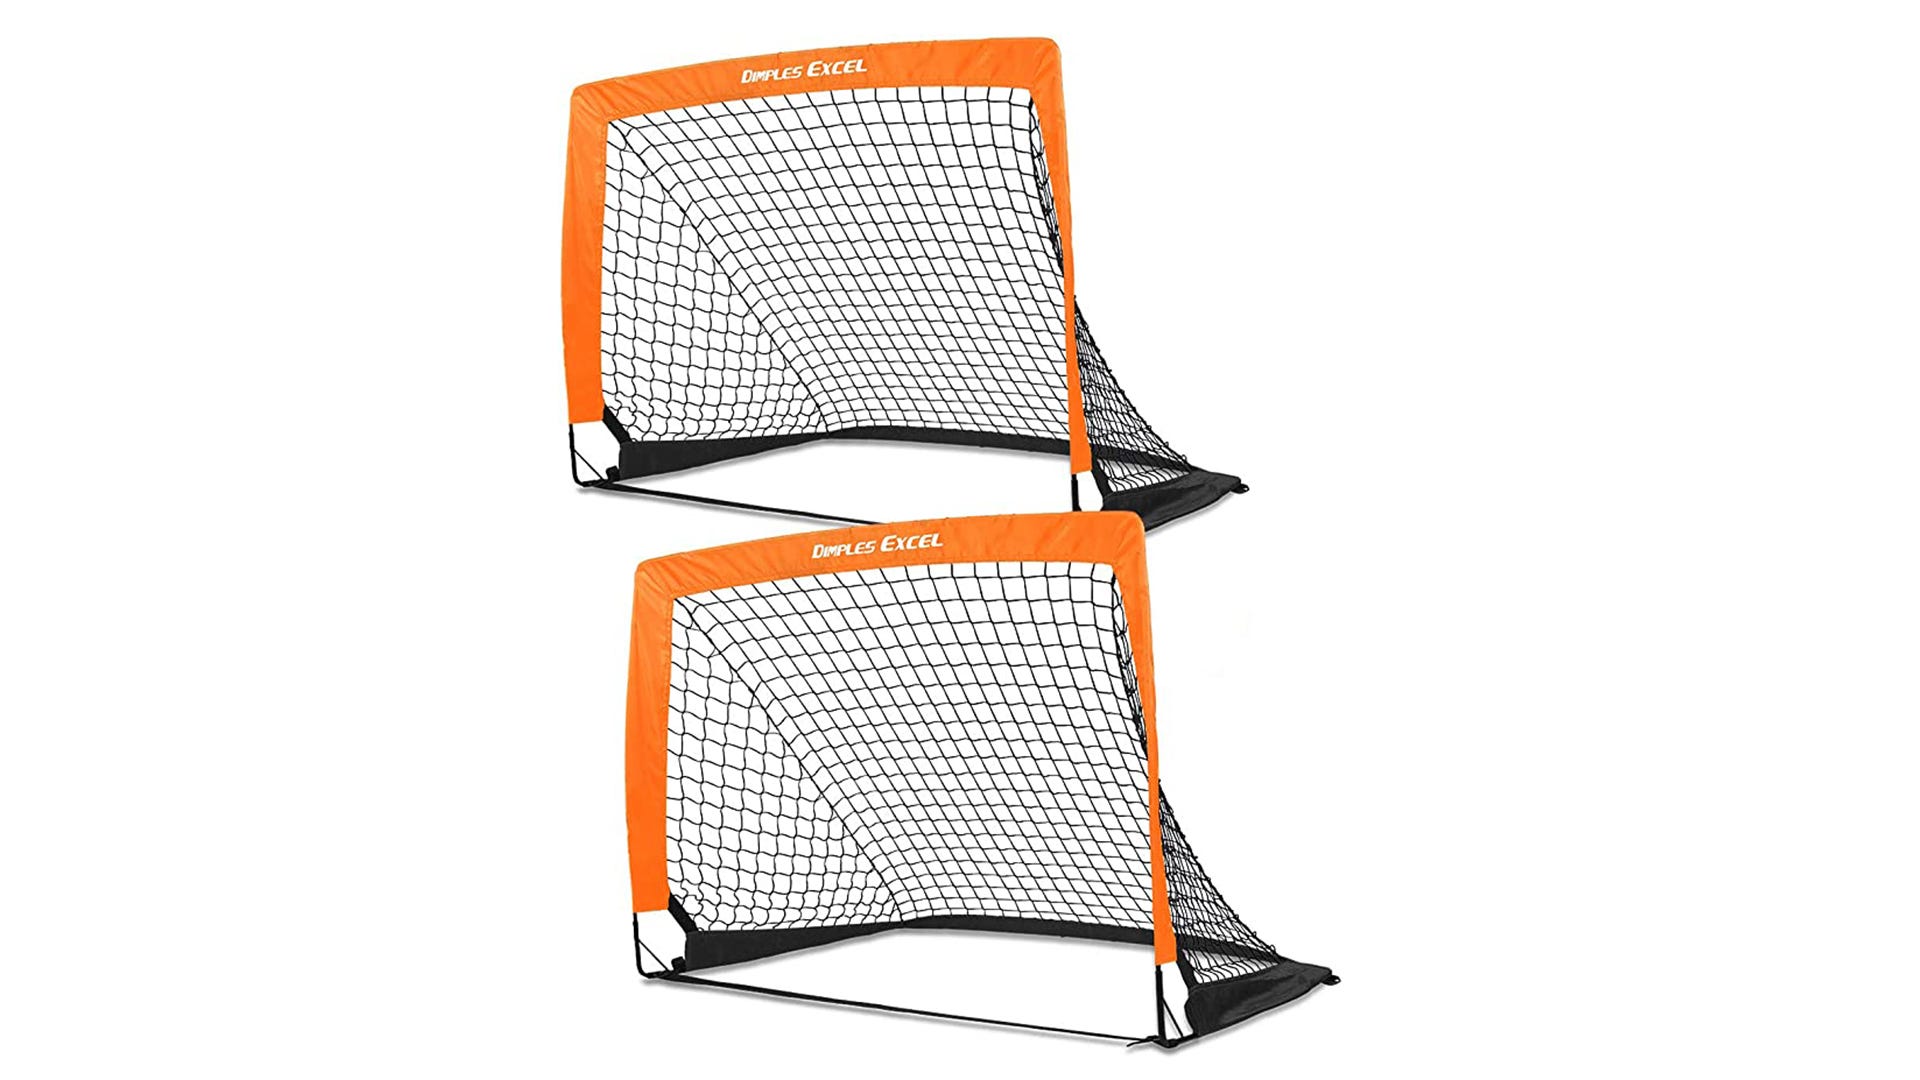 EAZY2HD Portable Soccer Goal Pop Up Goal Nets with Aim Target with 8 Agility Training Cones and Portable Carrying Case for Kids & Adults,4 Wide,Set of 2 